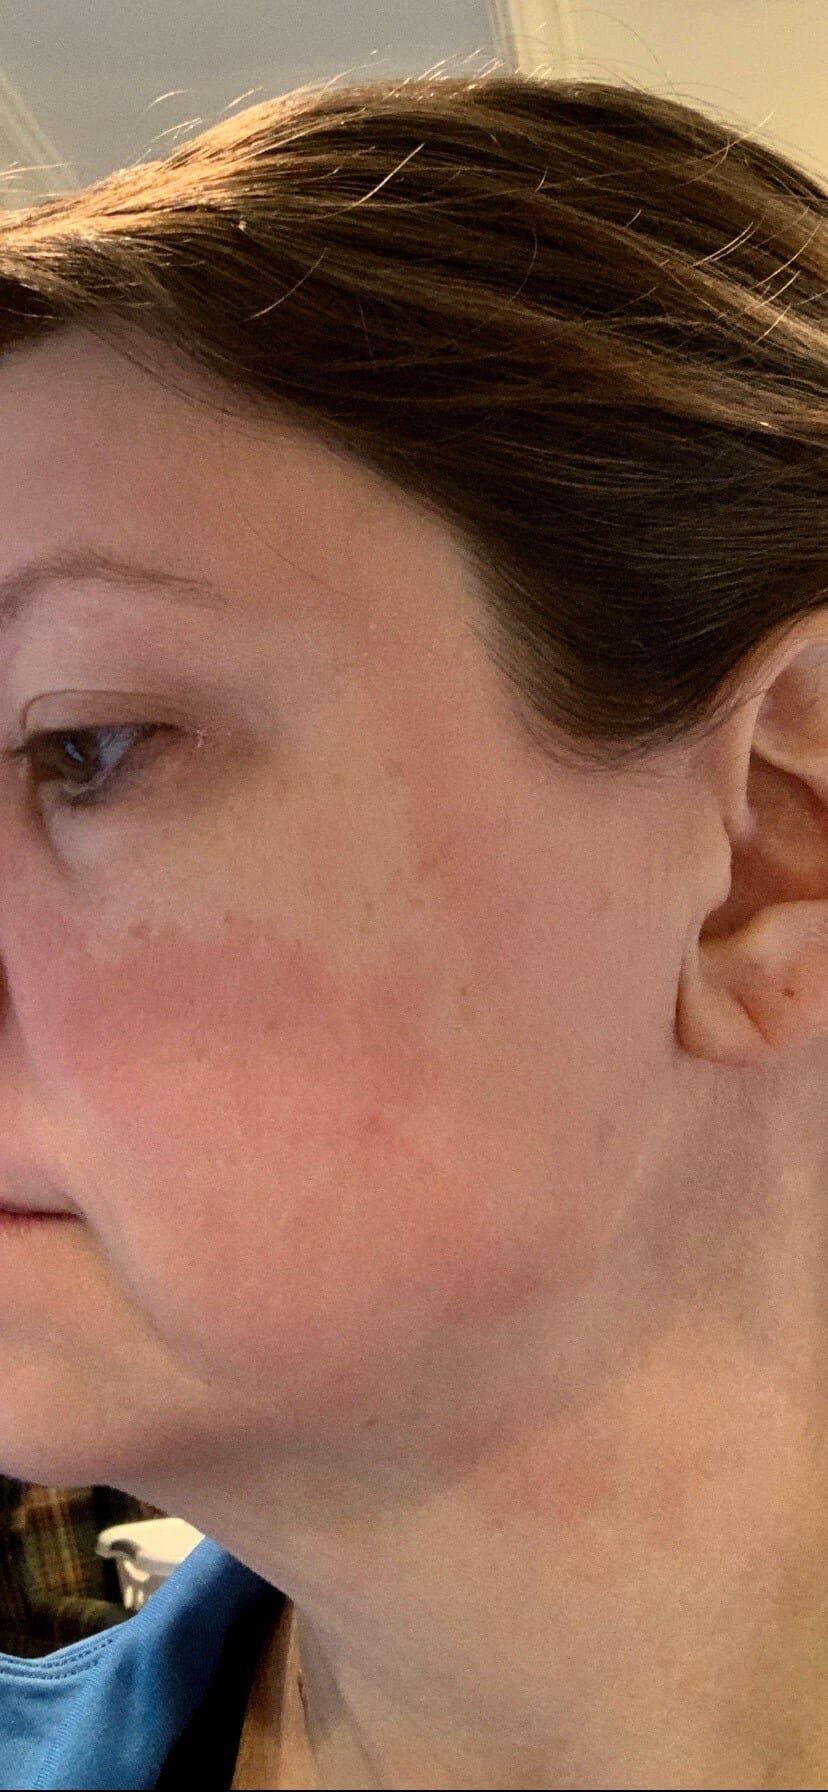 picture of red welts on cheek